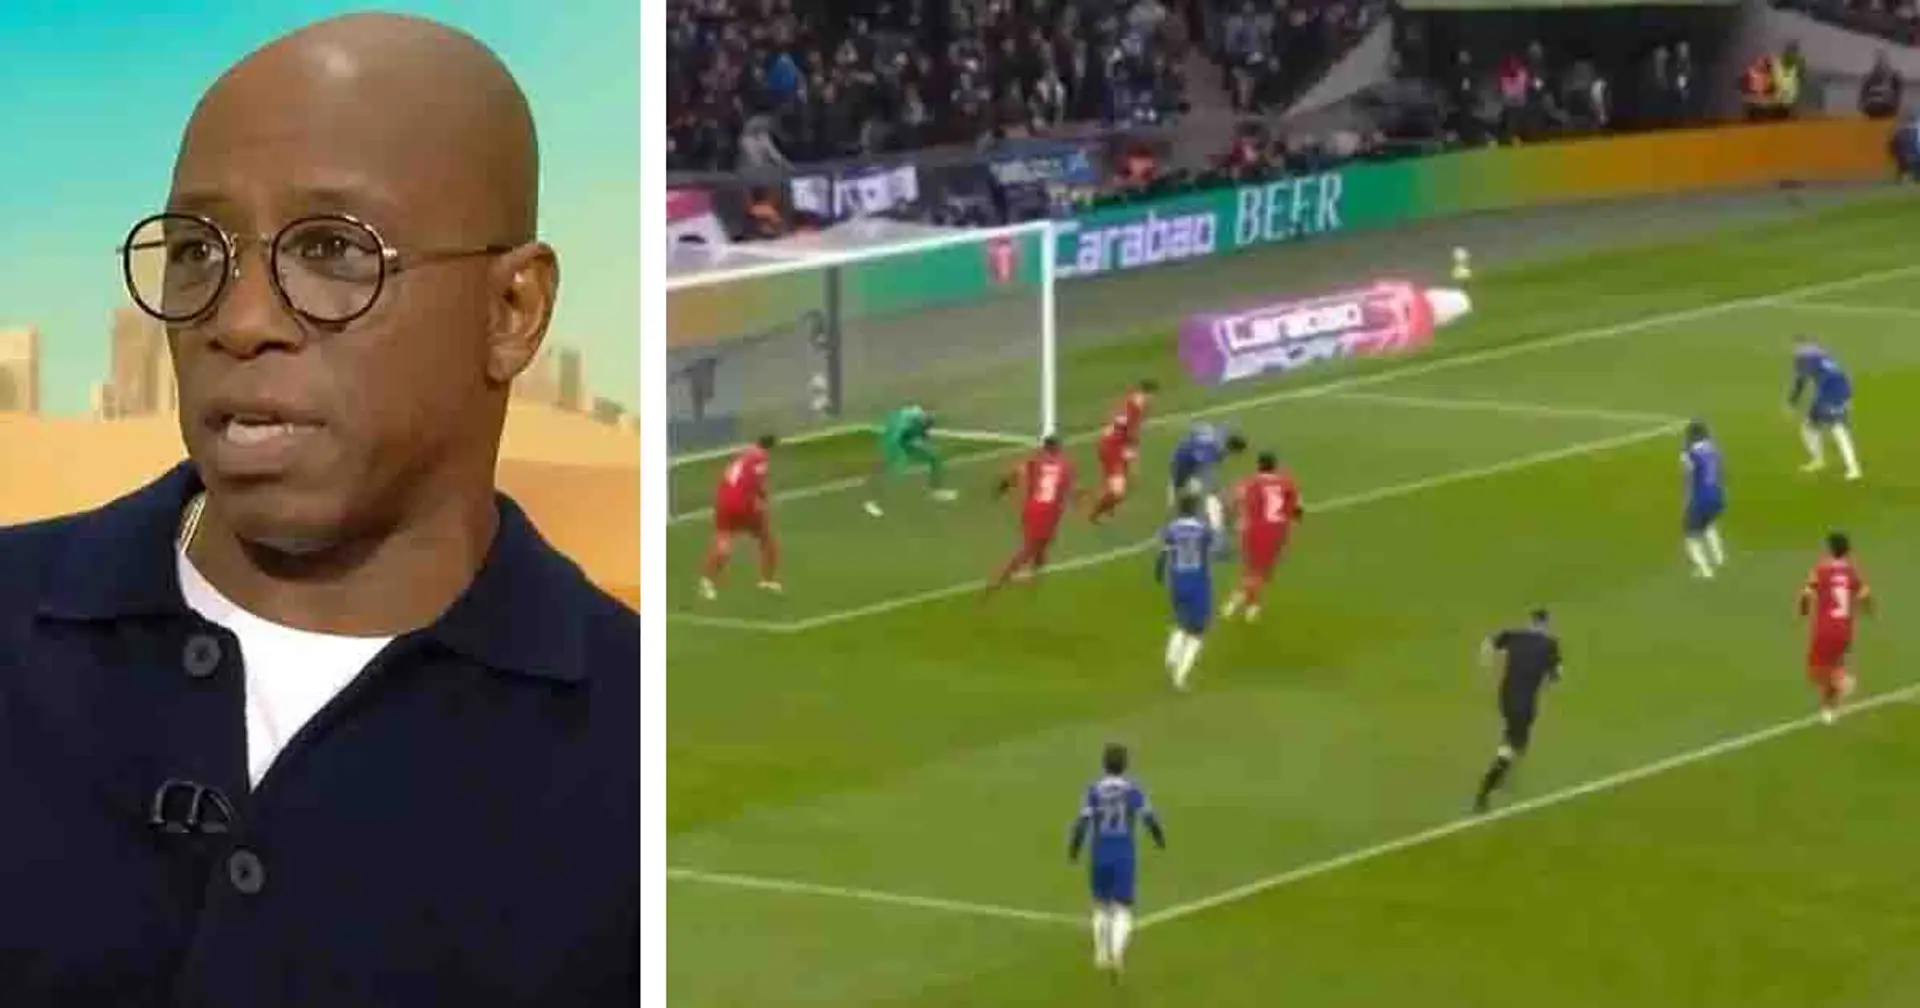 'There's no togetherness': Ian Wright criticizes one Chelsea player's selfishness in Carabao Cup final